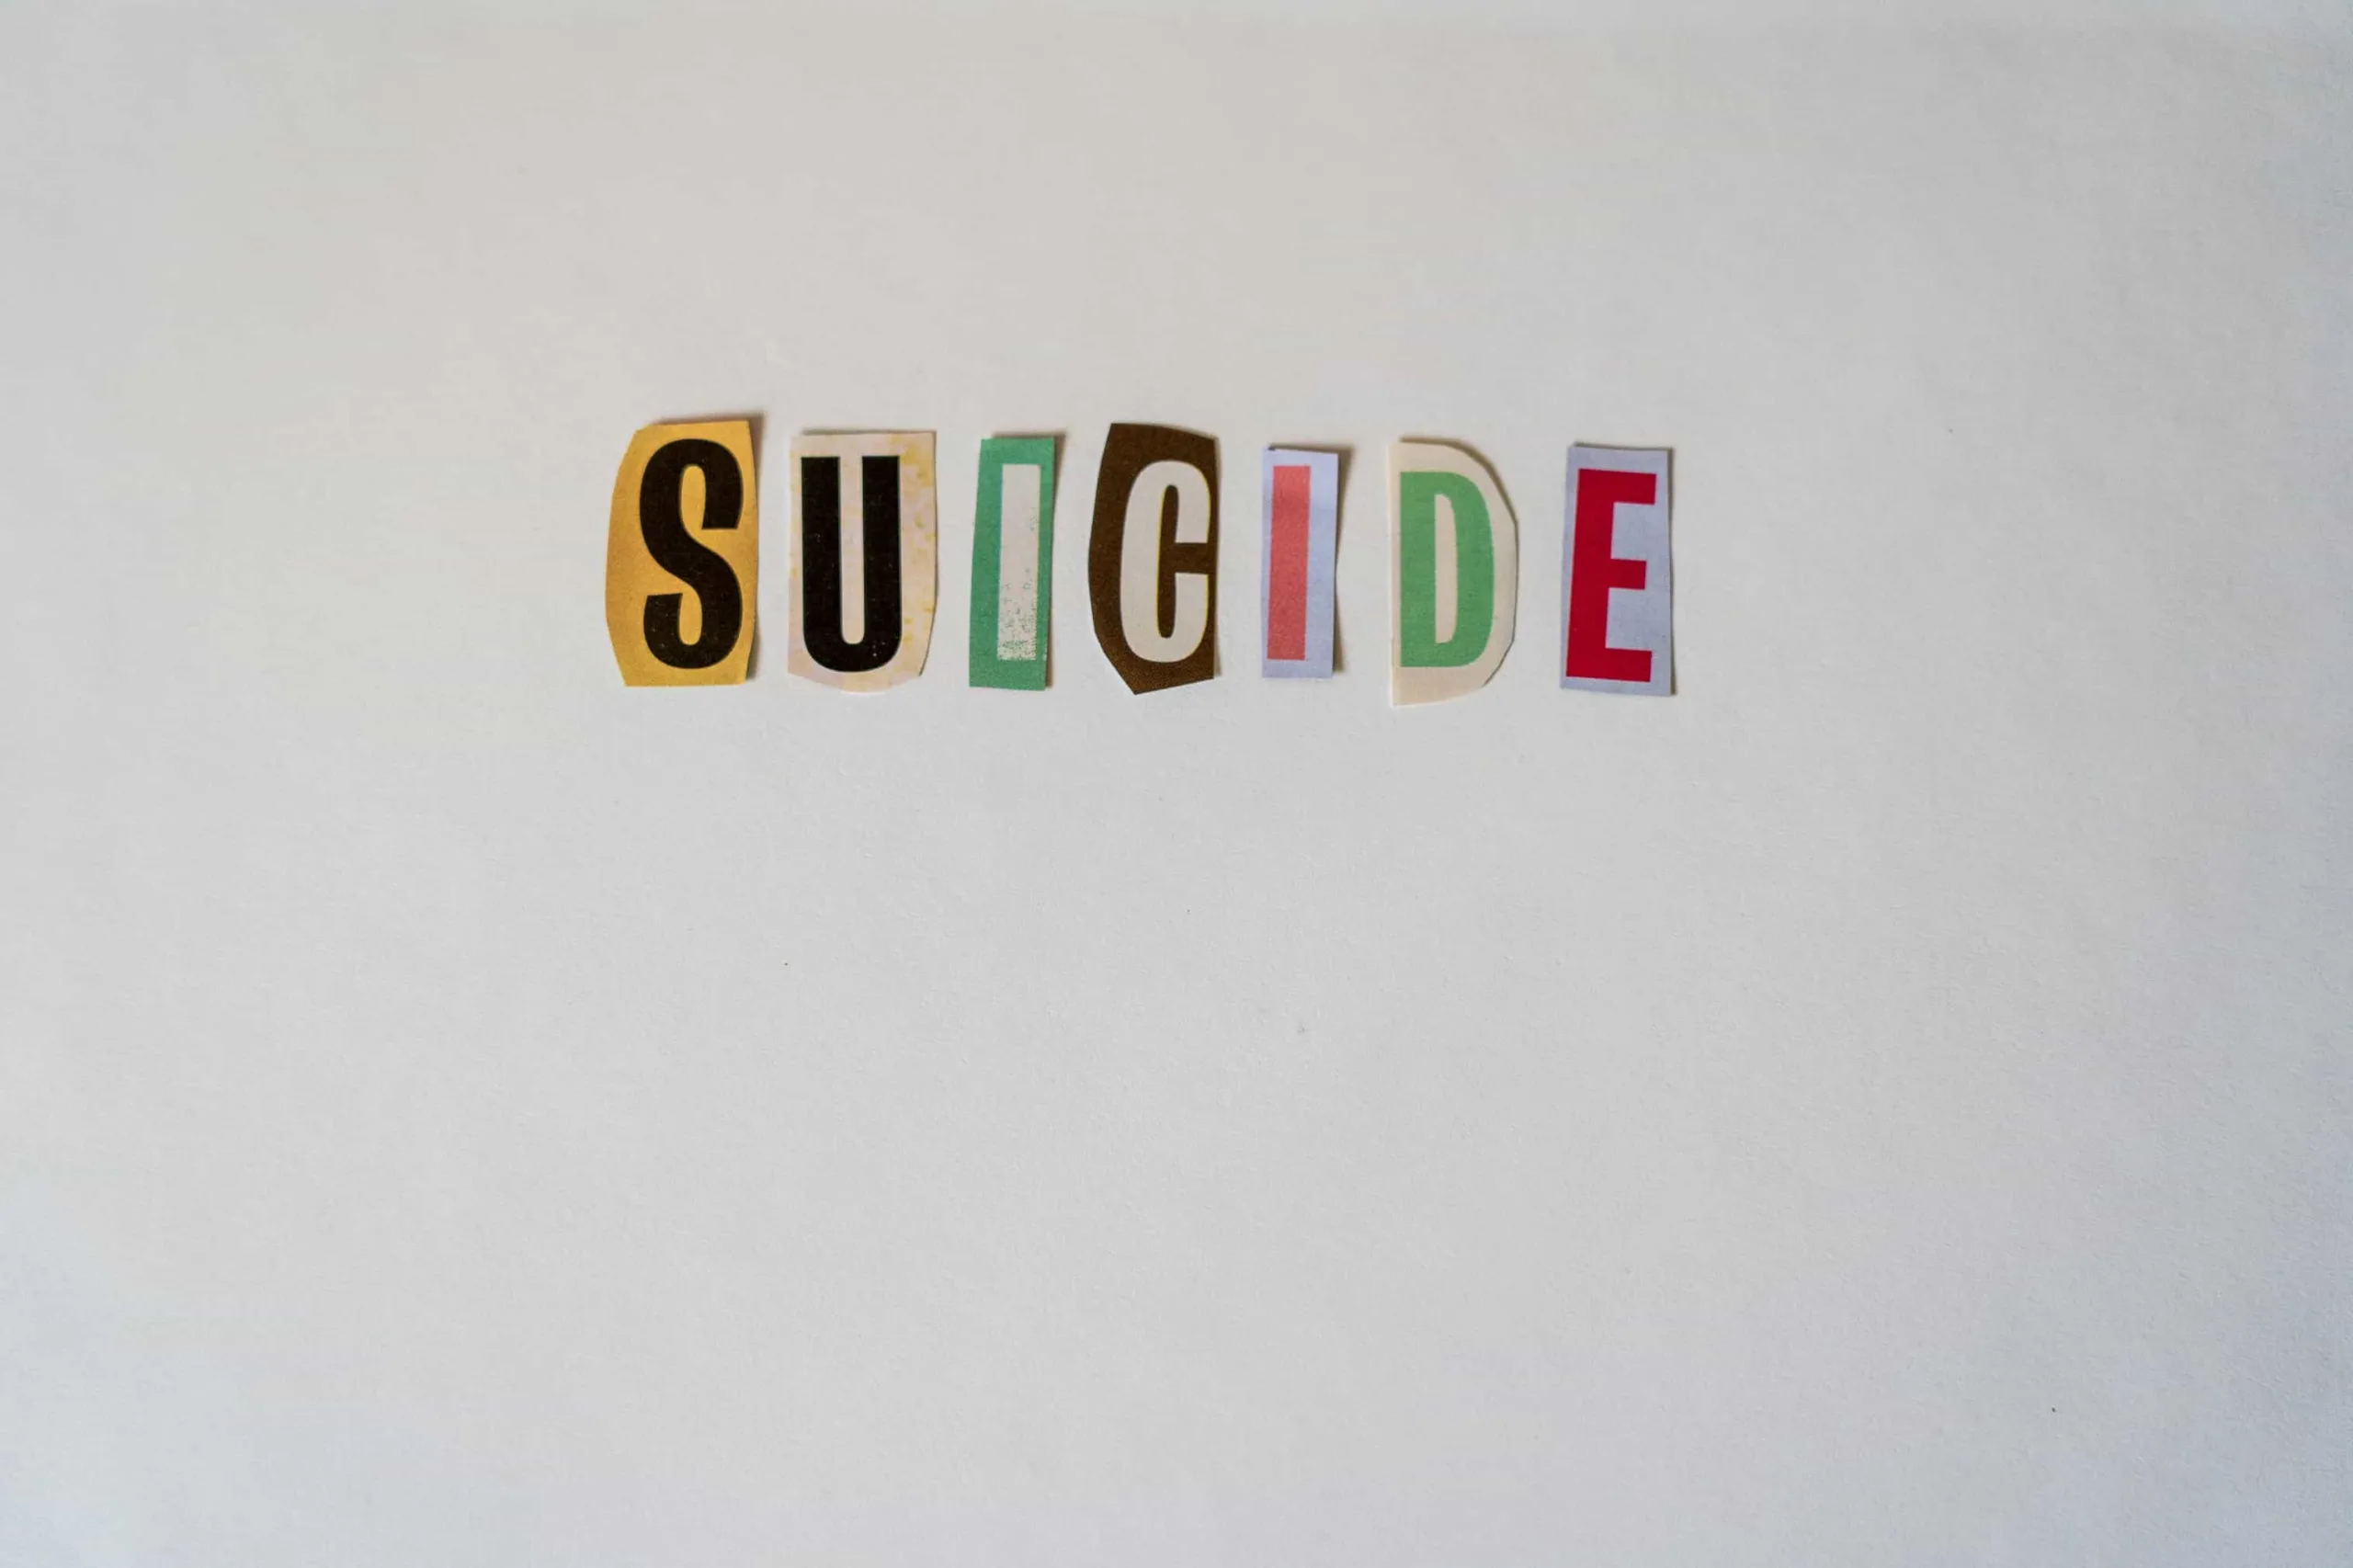 Recent Suicide Rates in the UK – SOS Study